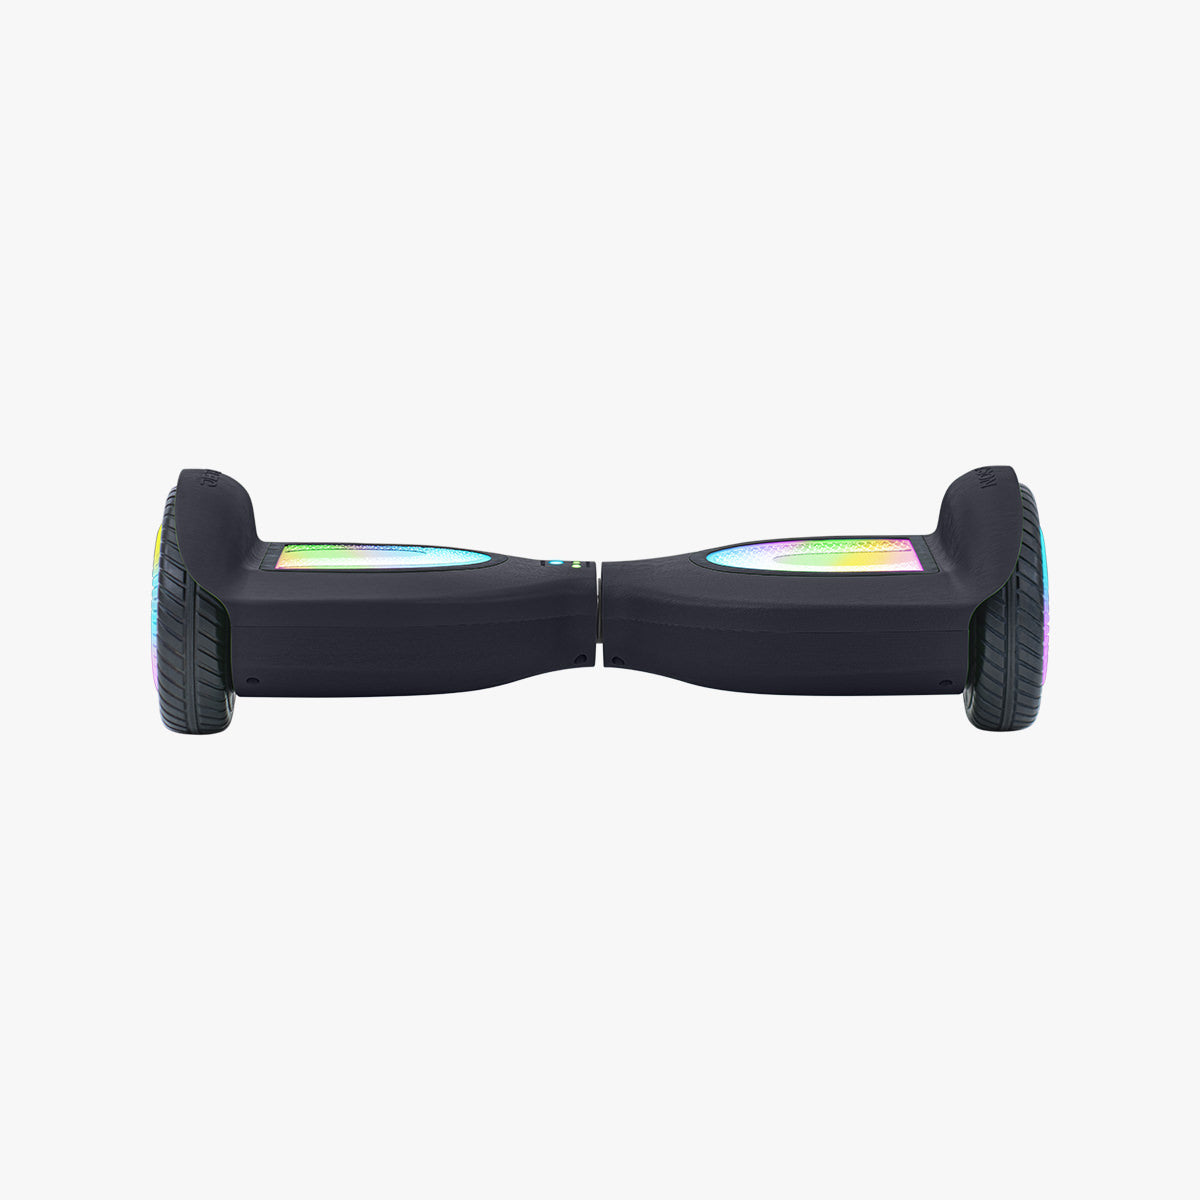 straight on front view of the black Mojo hoverboard